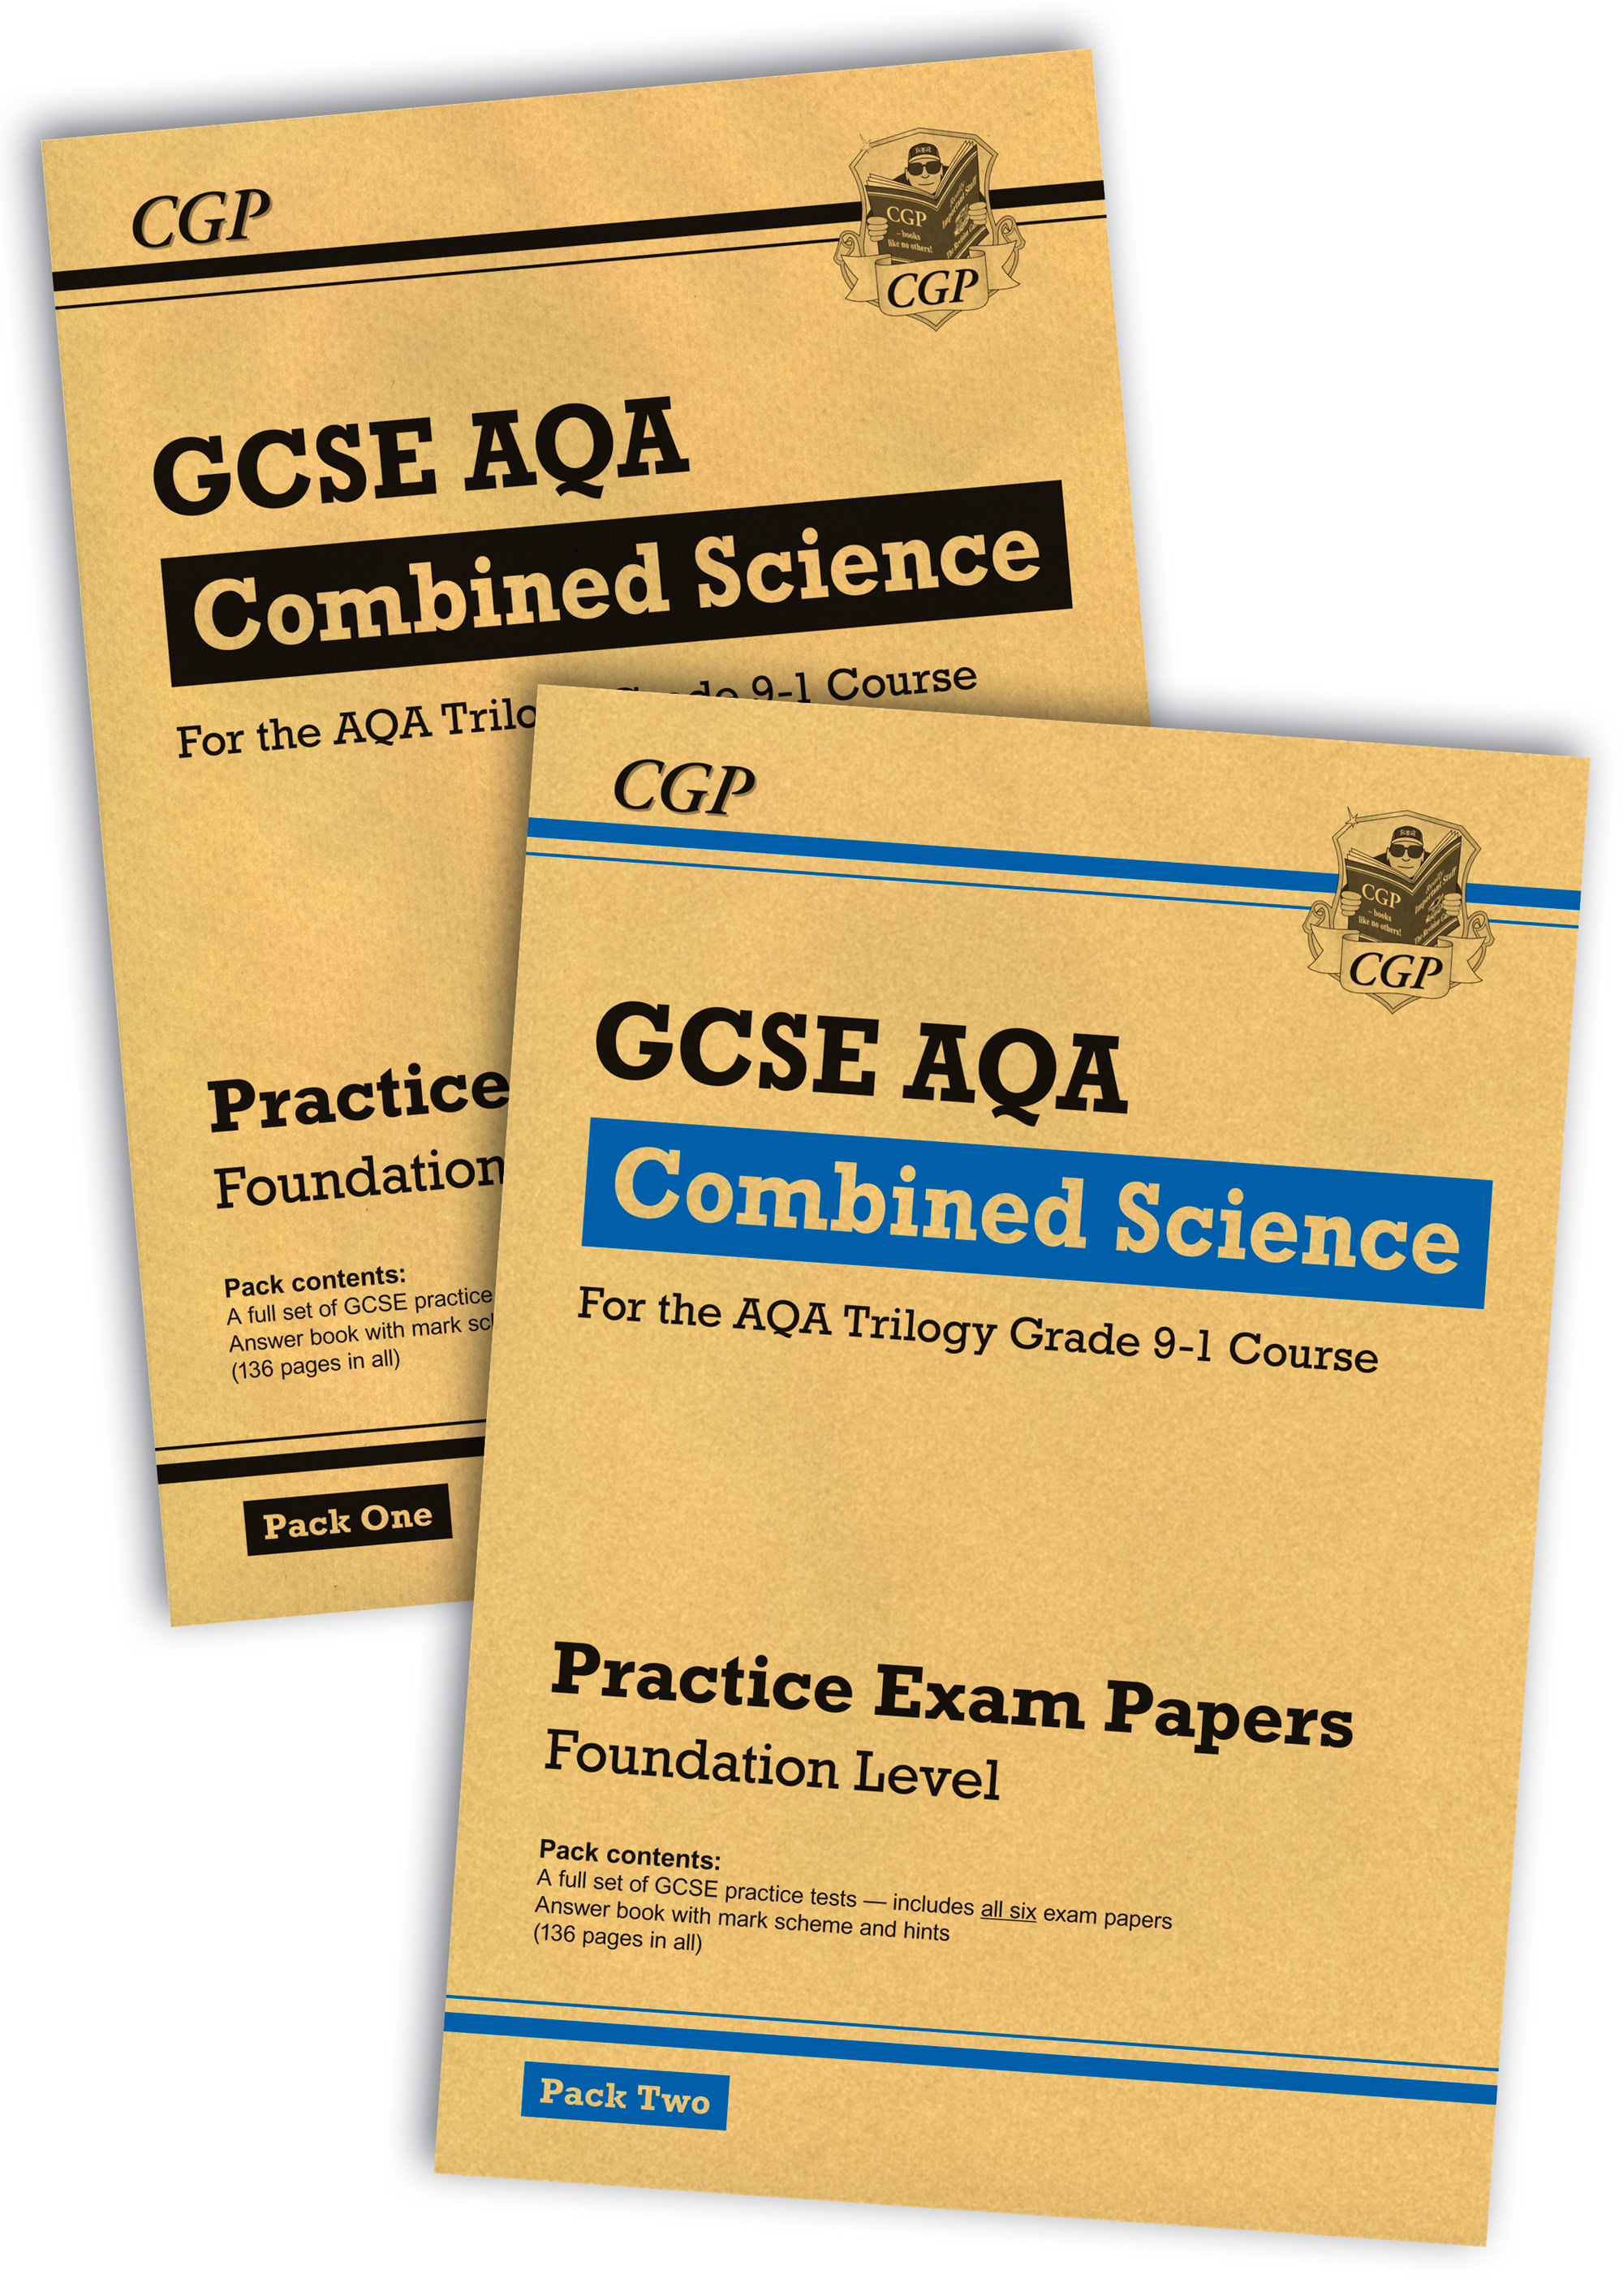 Revision Tips For Your GCSE Science Mocks